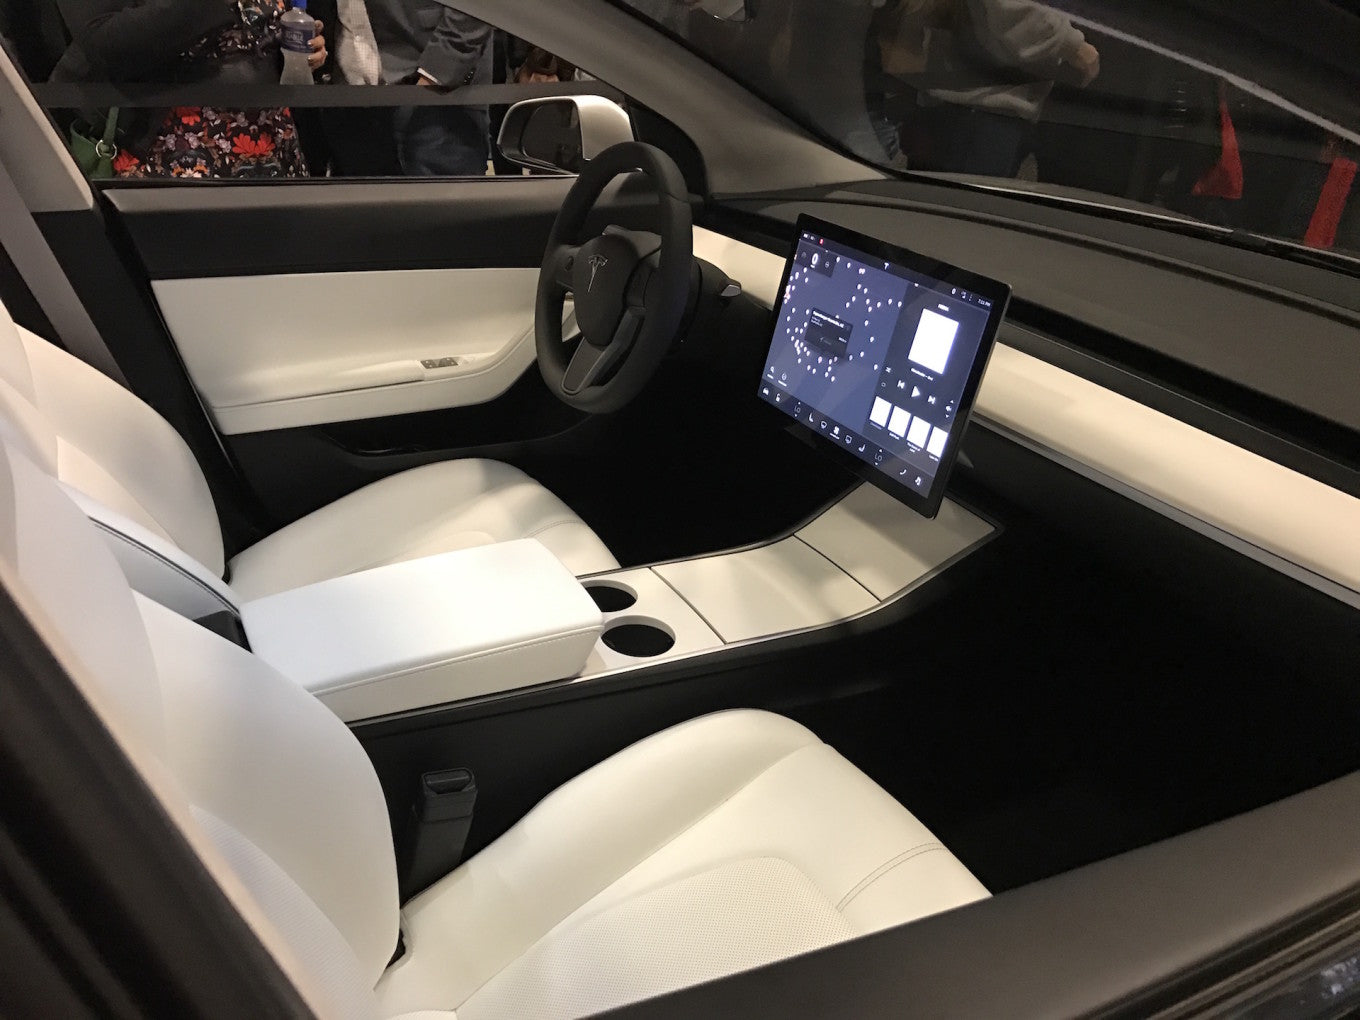 Tesla filed a patent for new material. Are we waiting for an update of the material for the seats and interior trim?